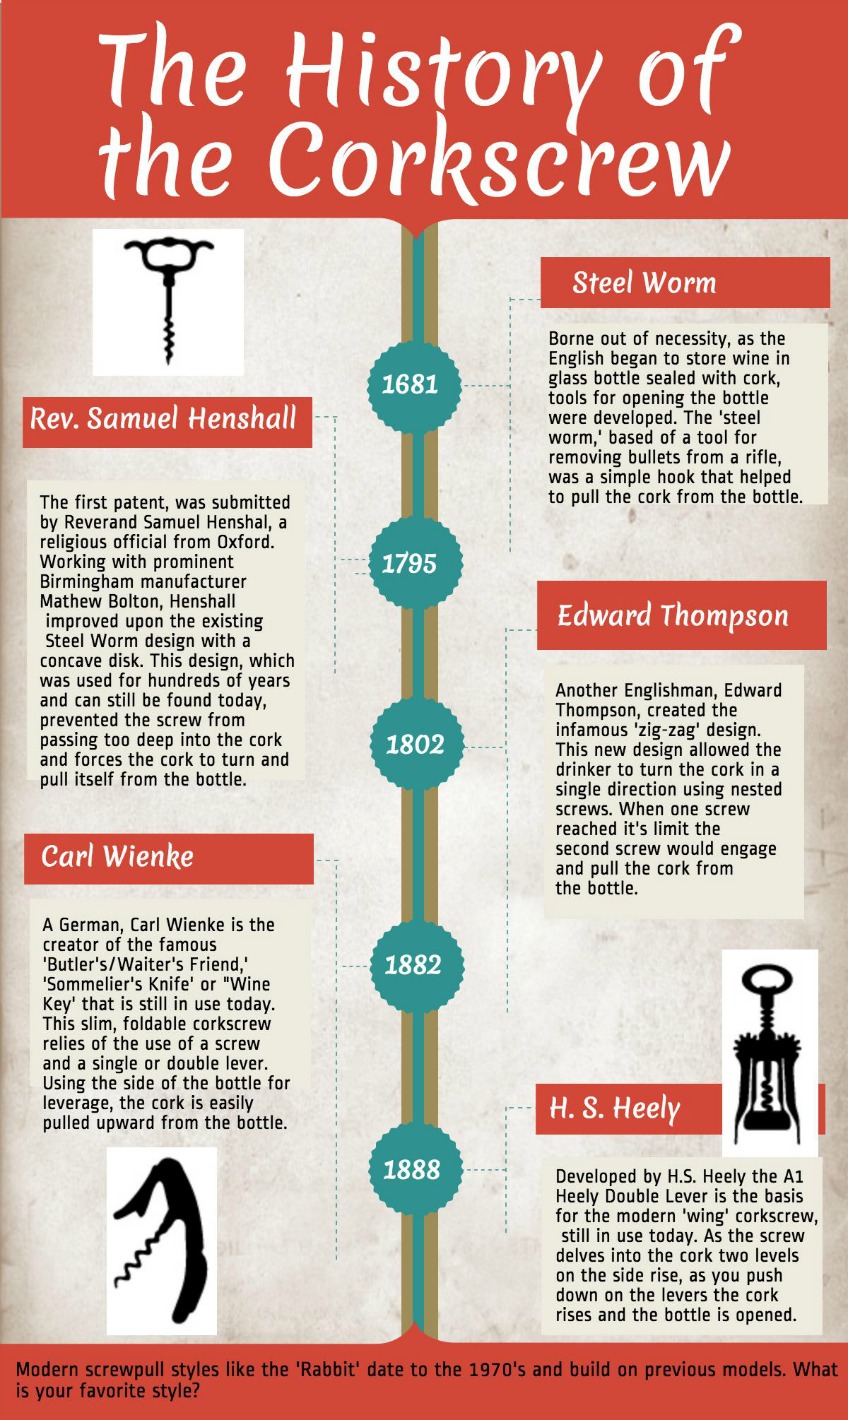 History of the corkscrew